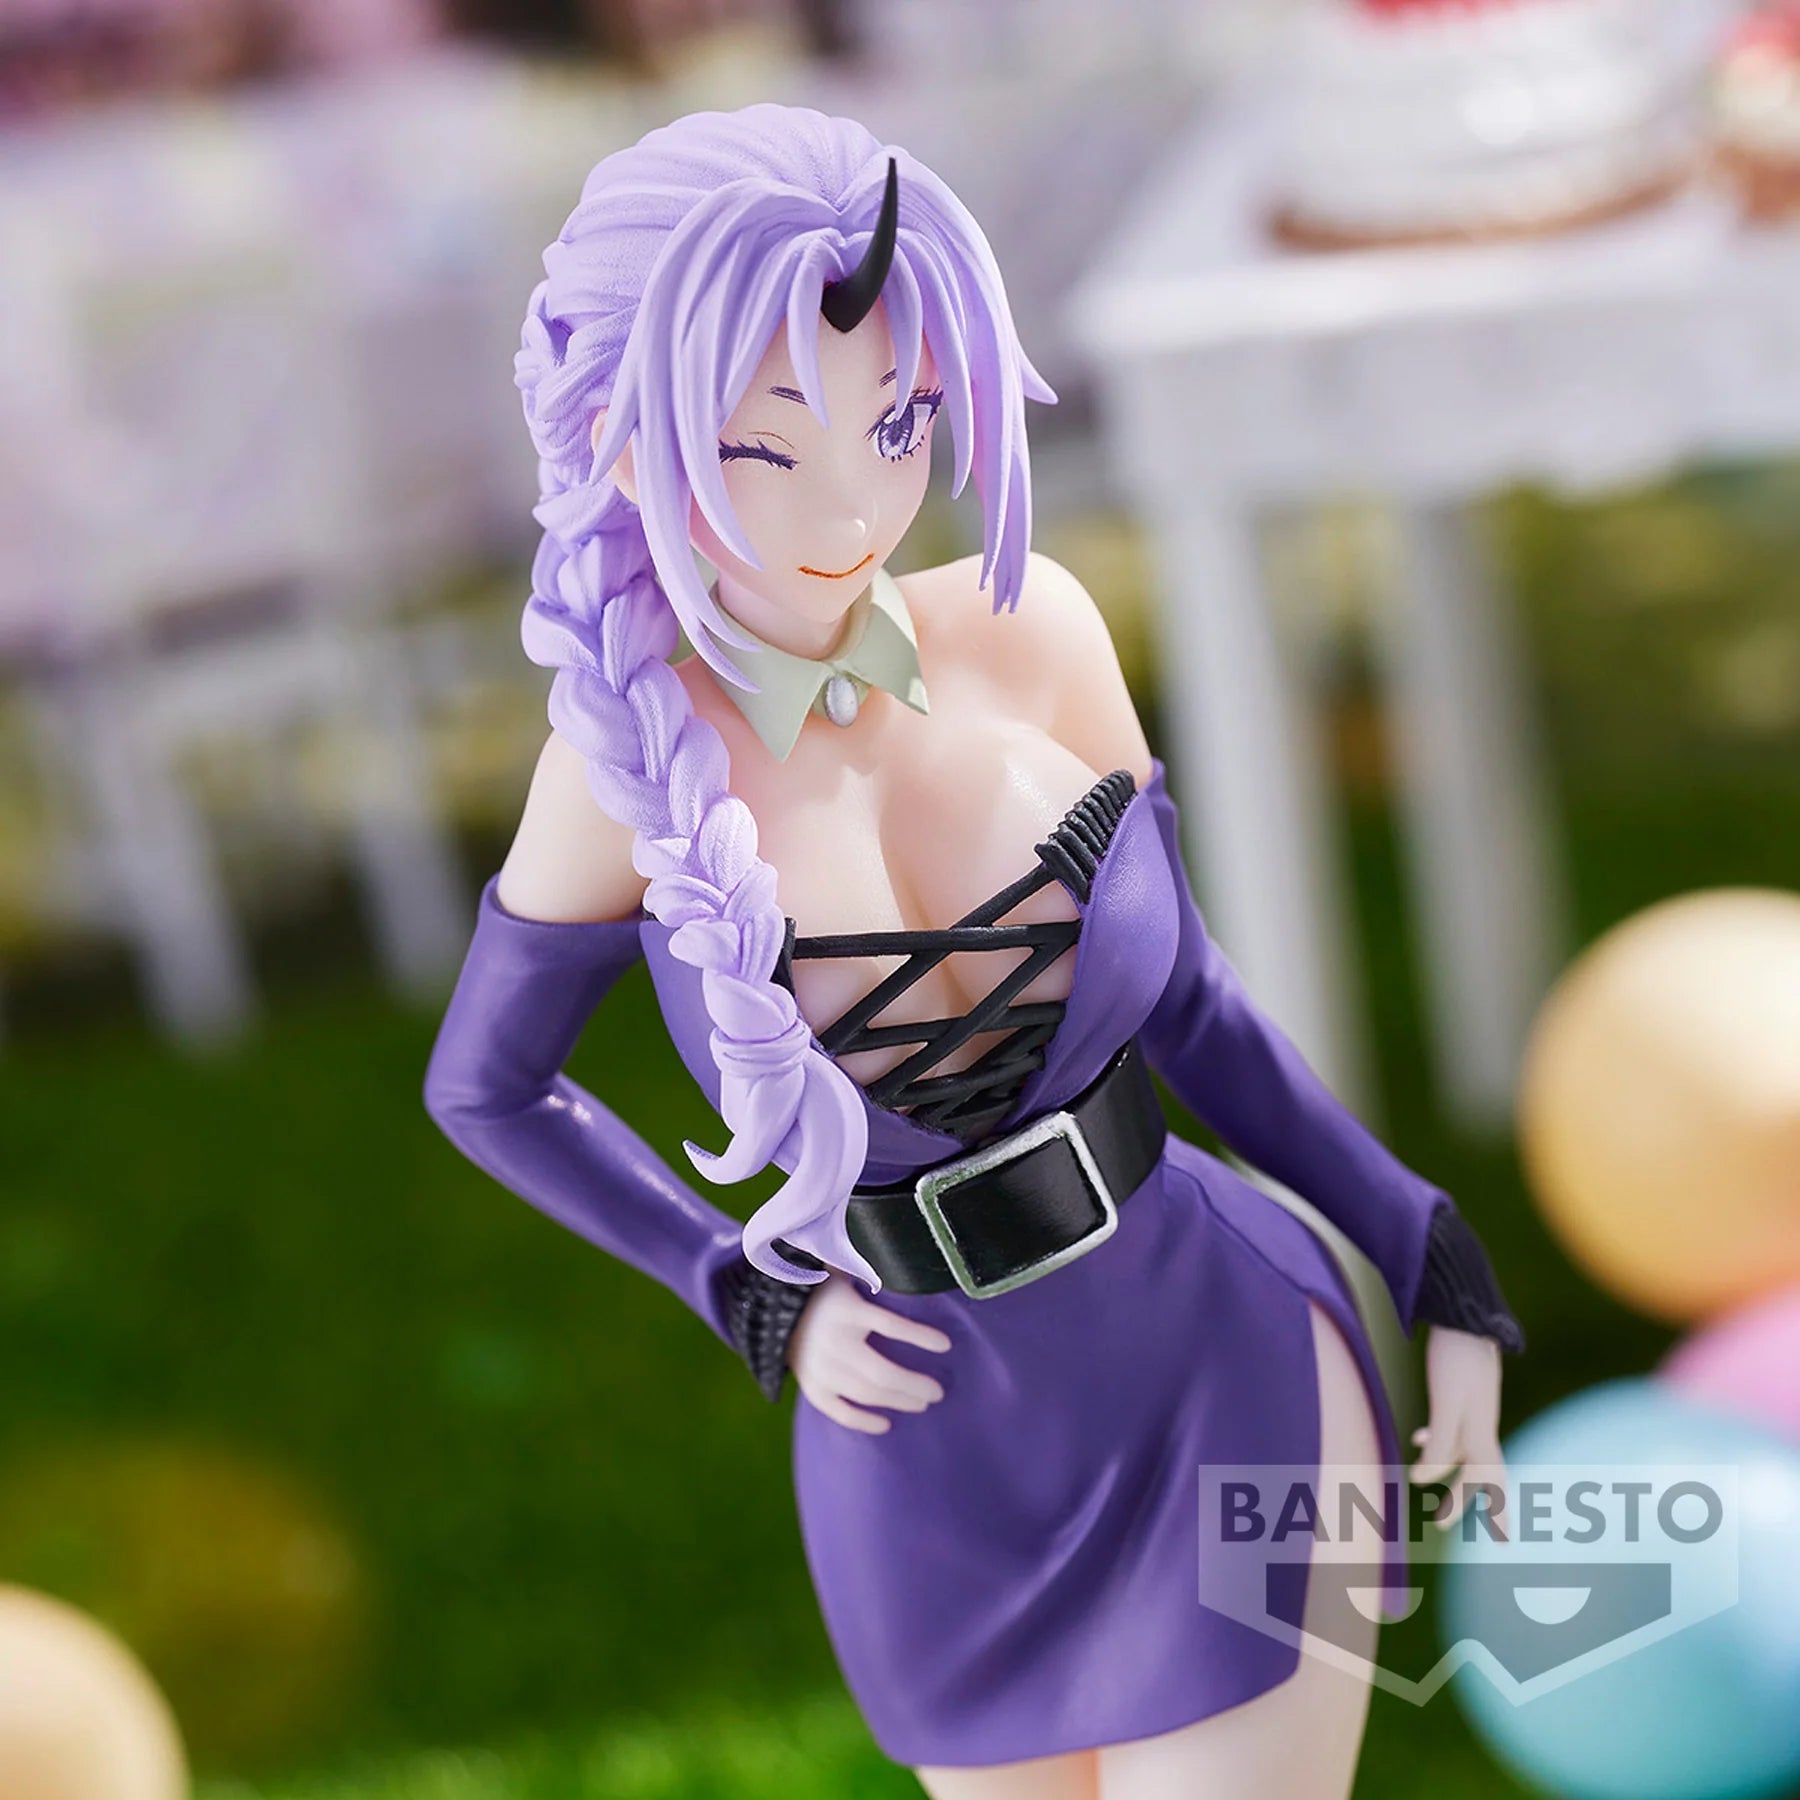 That Time I Got Reincarnated as a Slime: 10TH ANNIVERSARY FIGURE - Shion